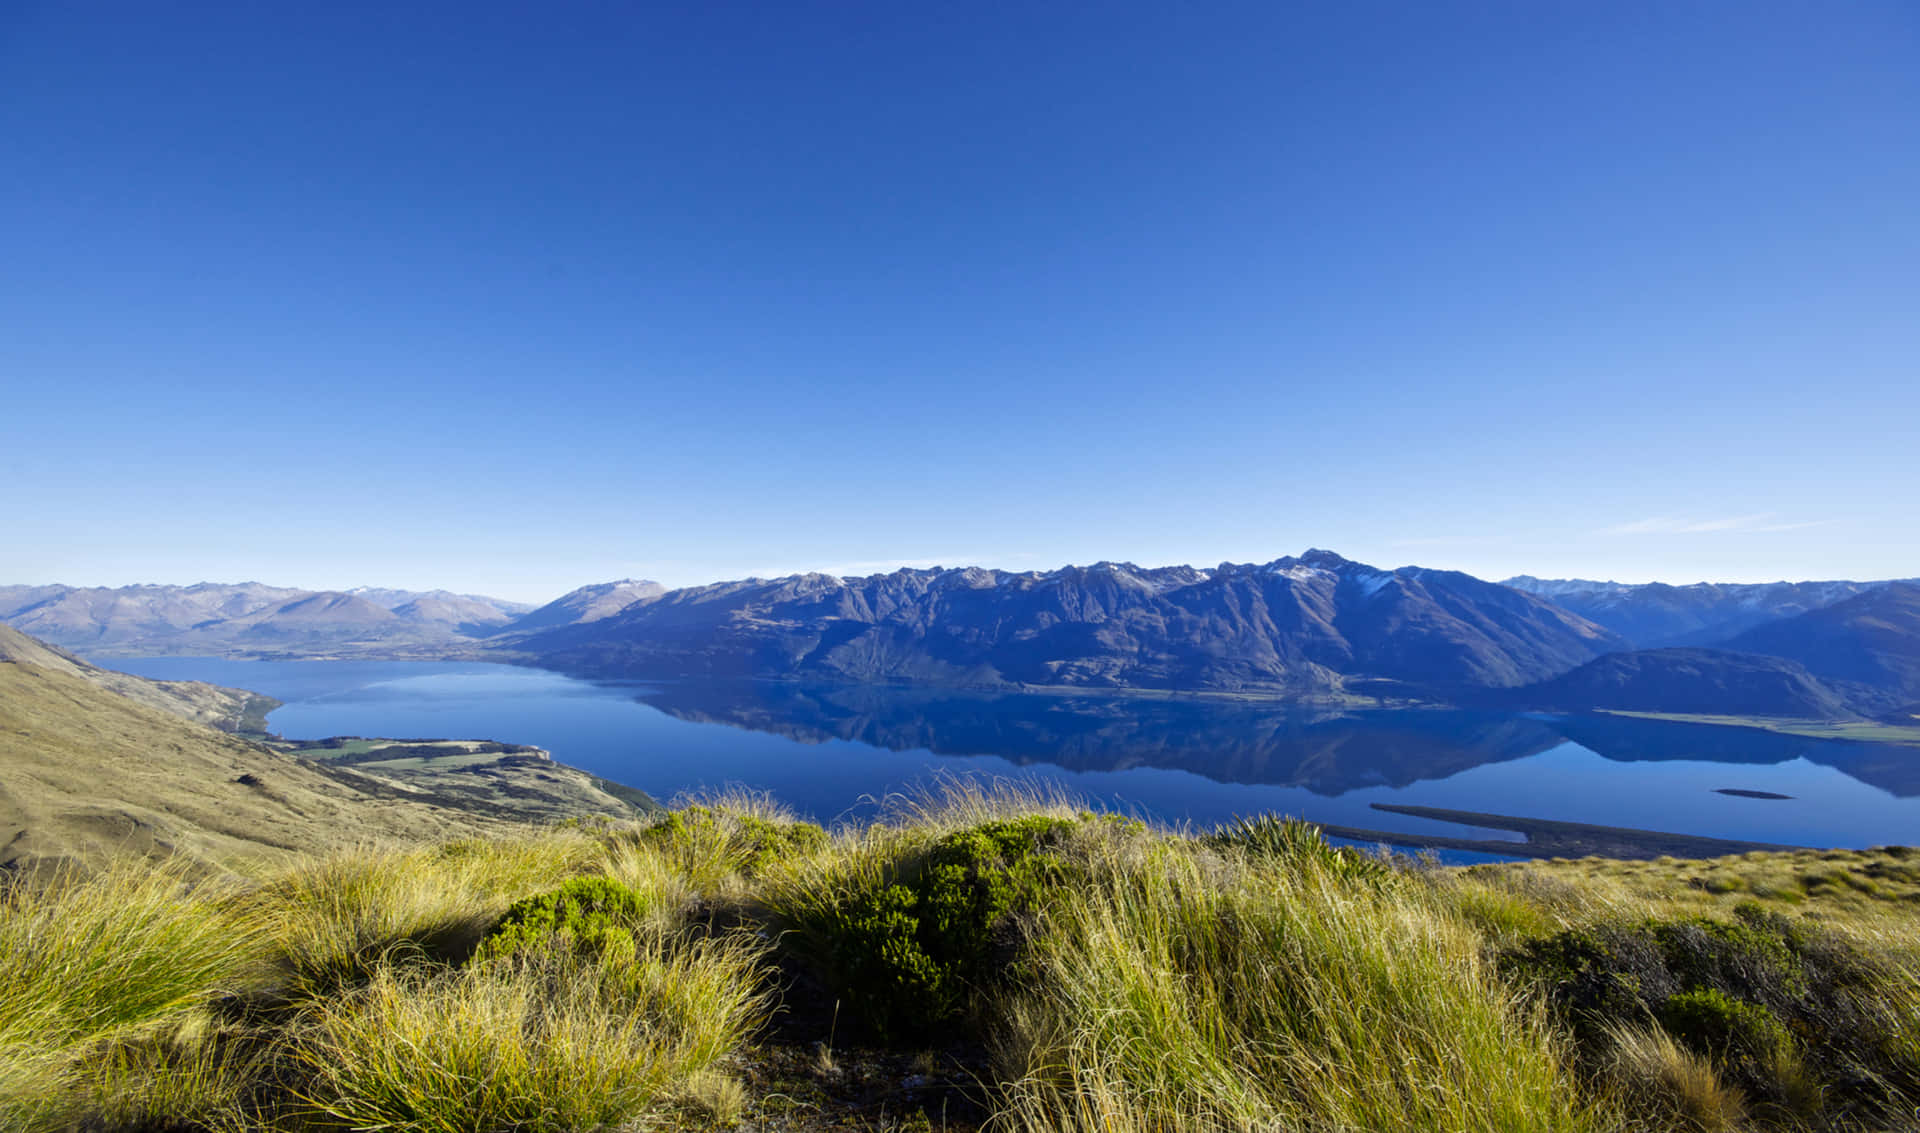 a view of lake wanaka from the top of a mountain